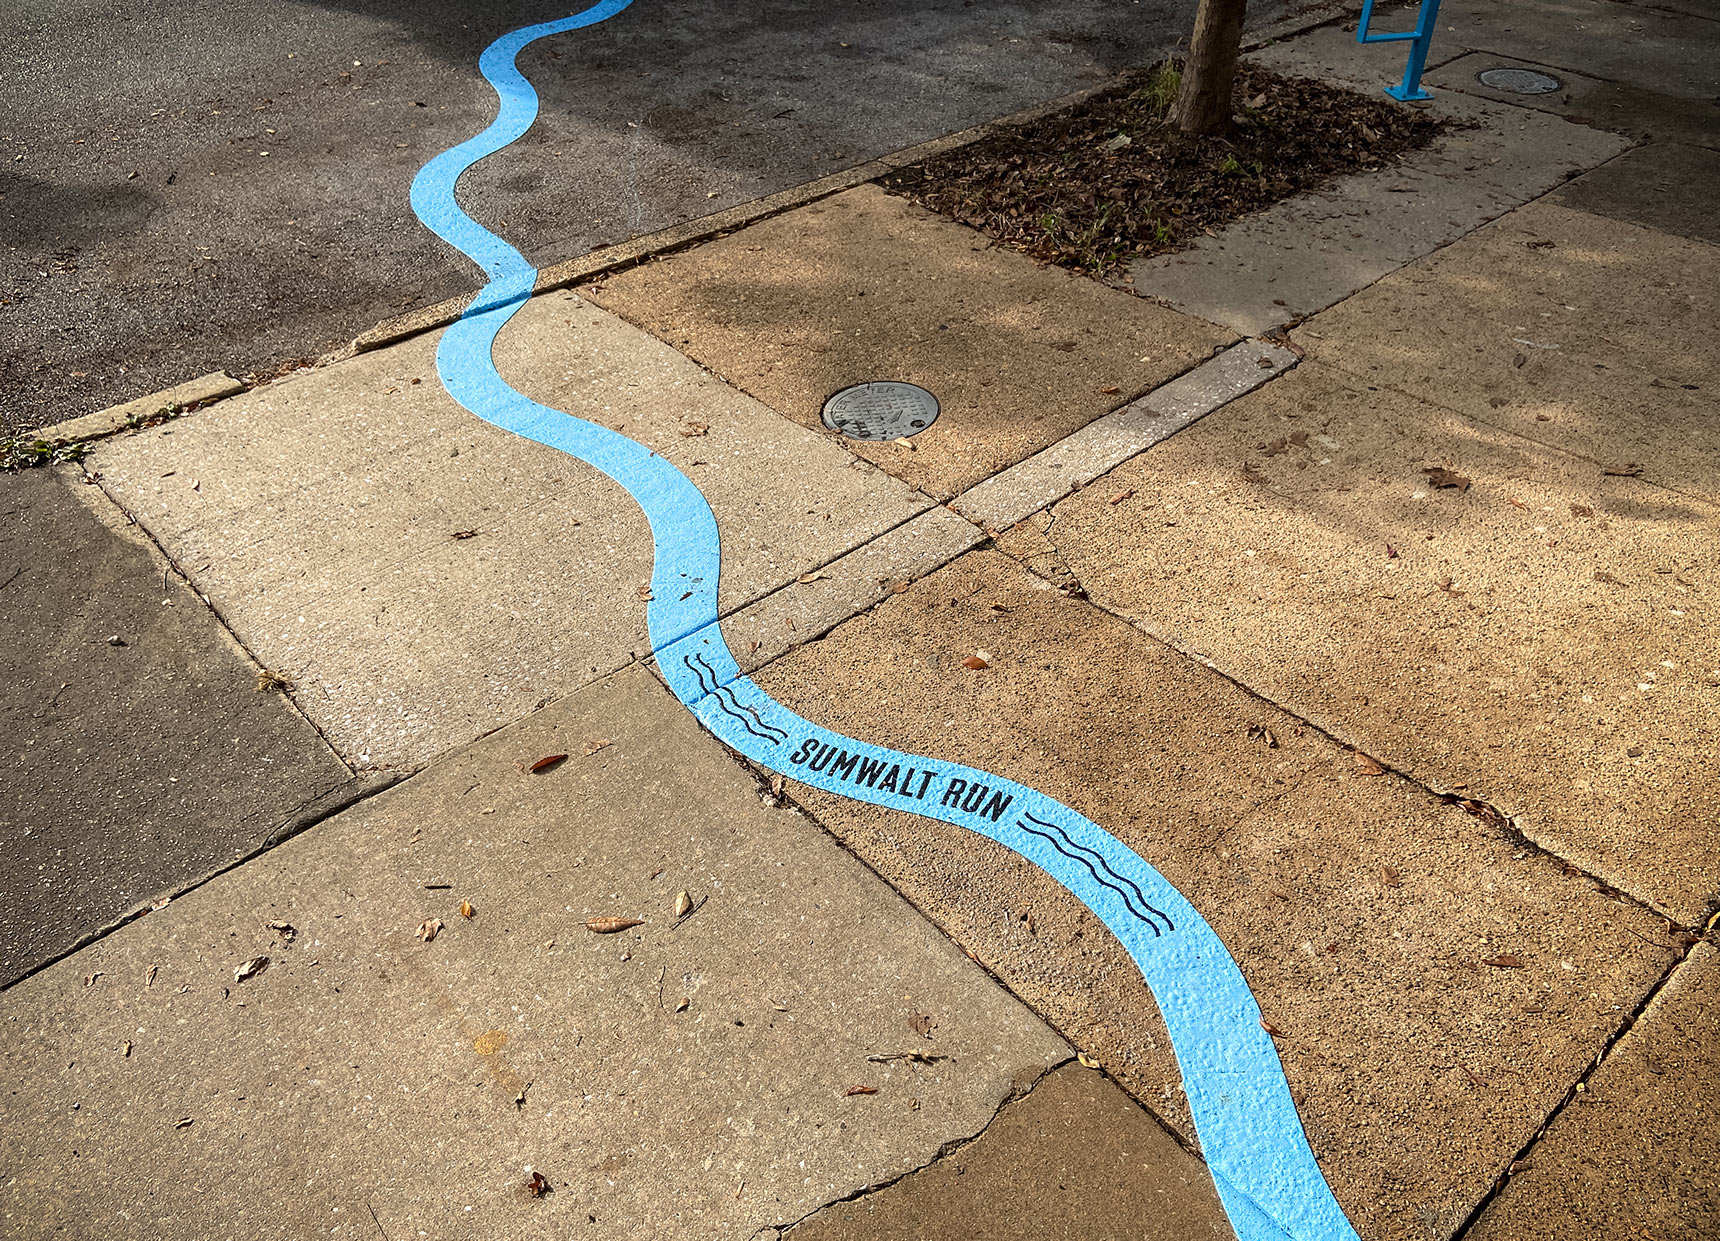 Photo of a public art installation mapping the path of an underground stream onto the pavement, showing a bright blue wavy line snaking across the sidewalk and onto the street. The words Sumwalt Run are imprinted onto the line.